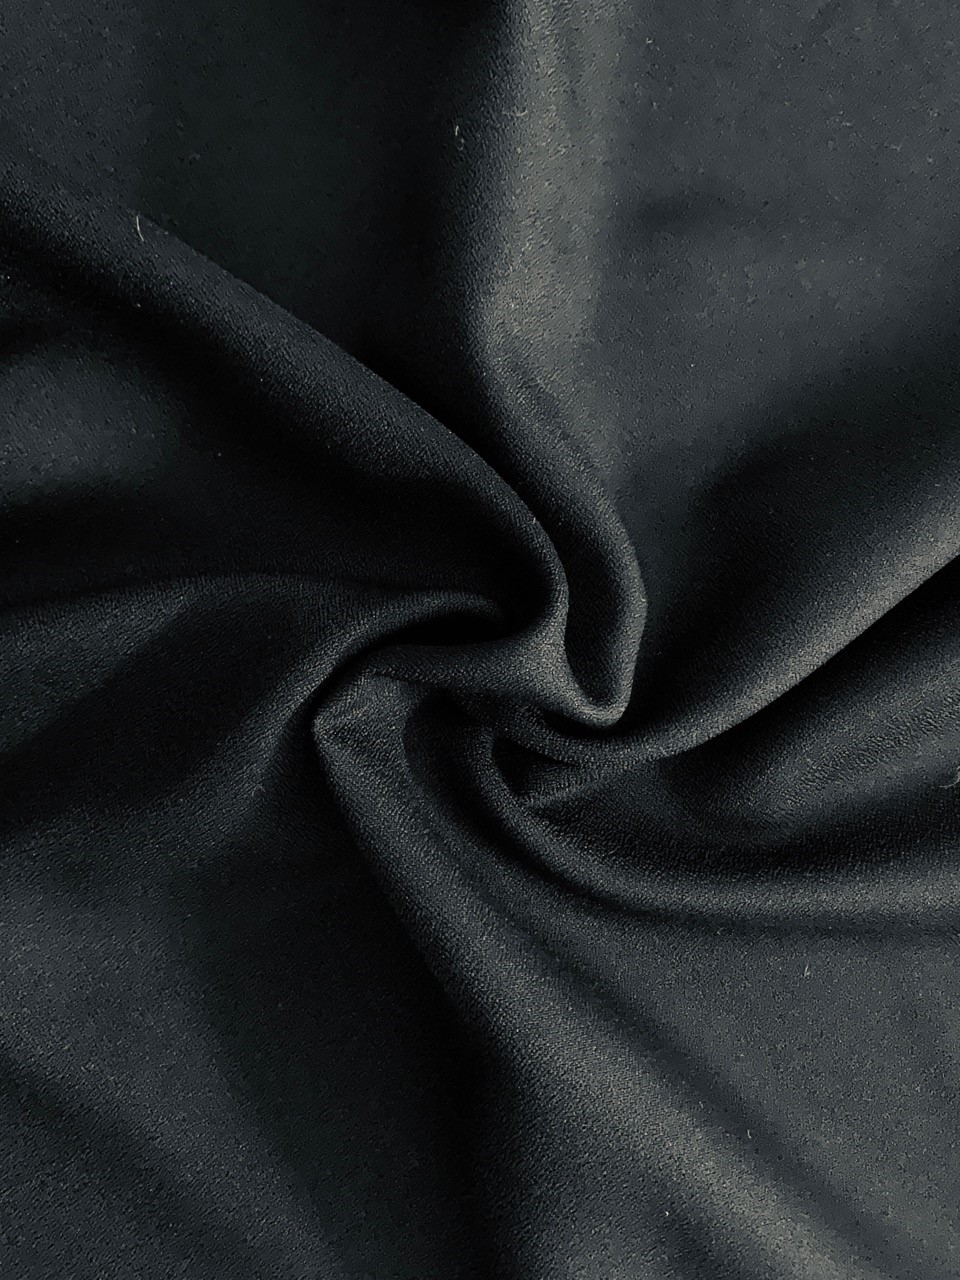 60" Wide Black Crepe- By the yard (100% Polyester)